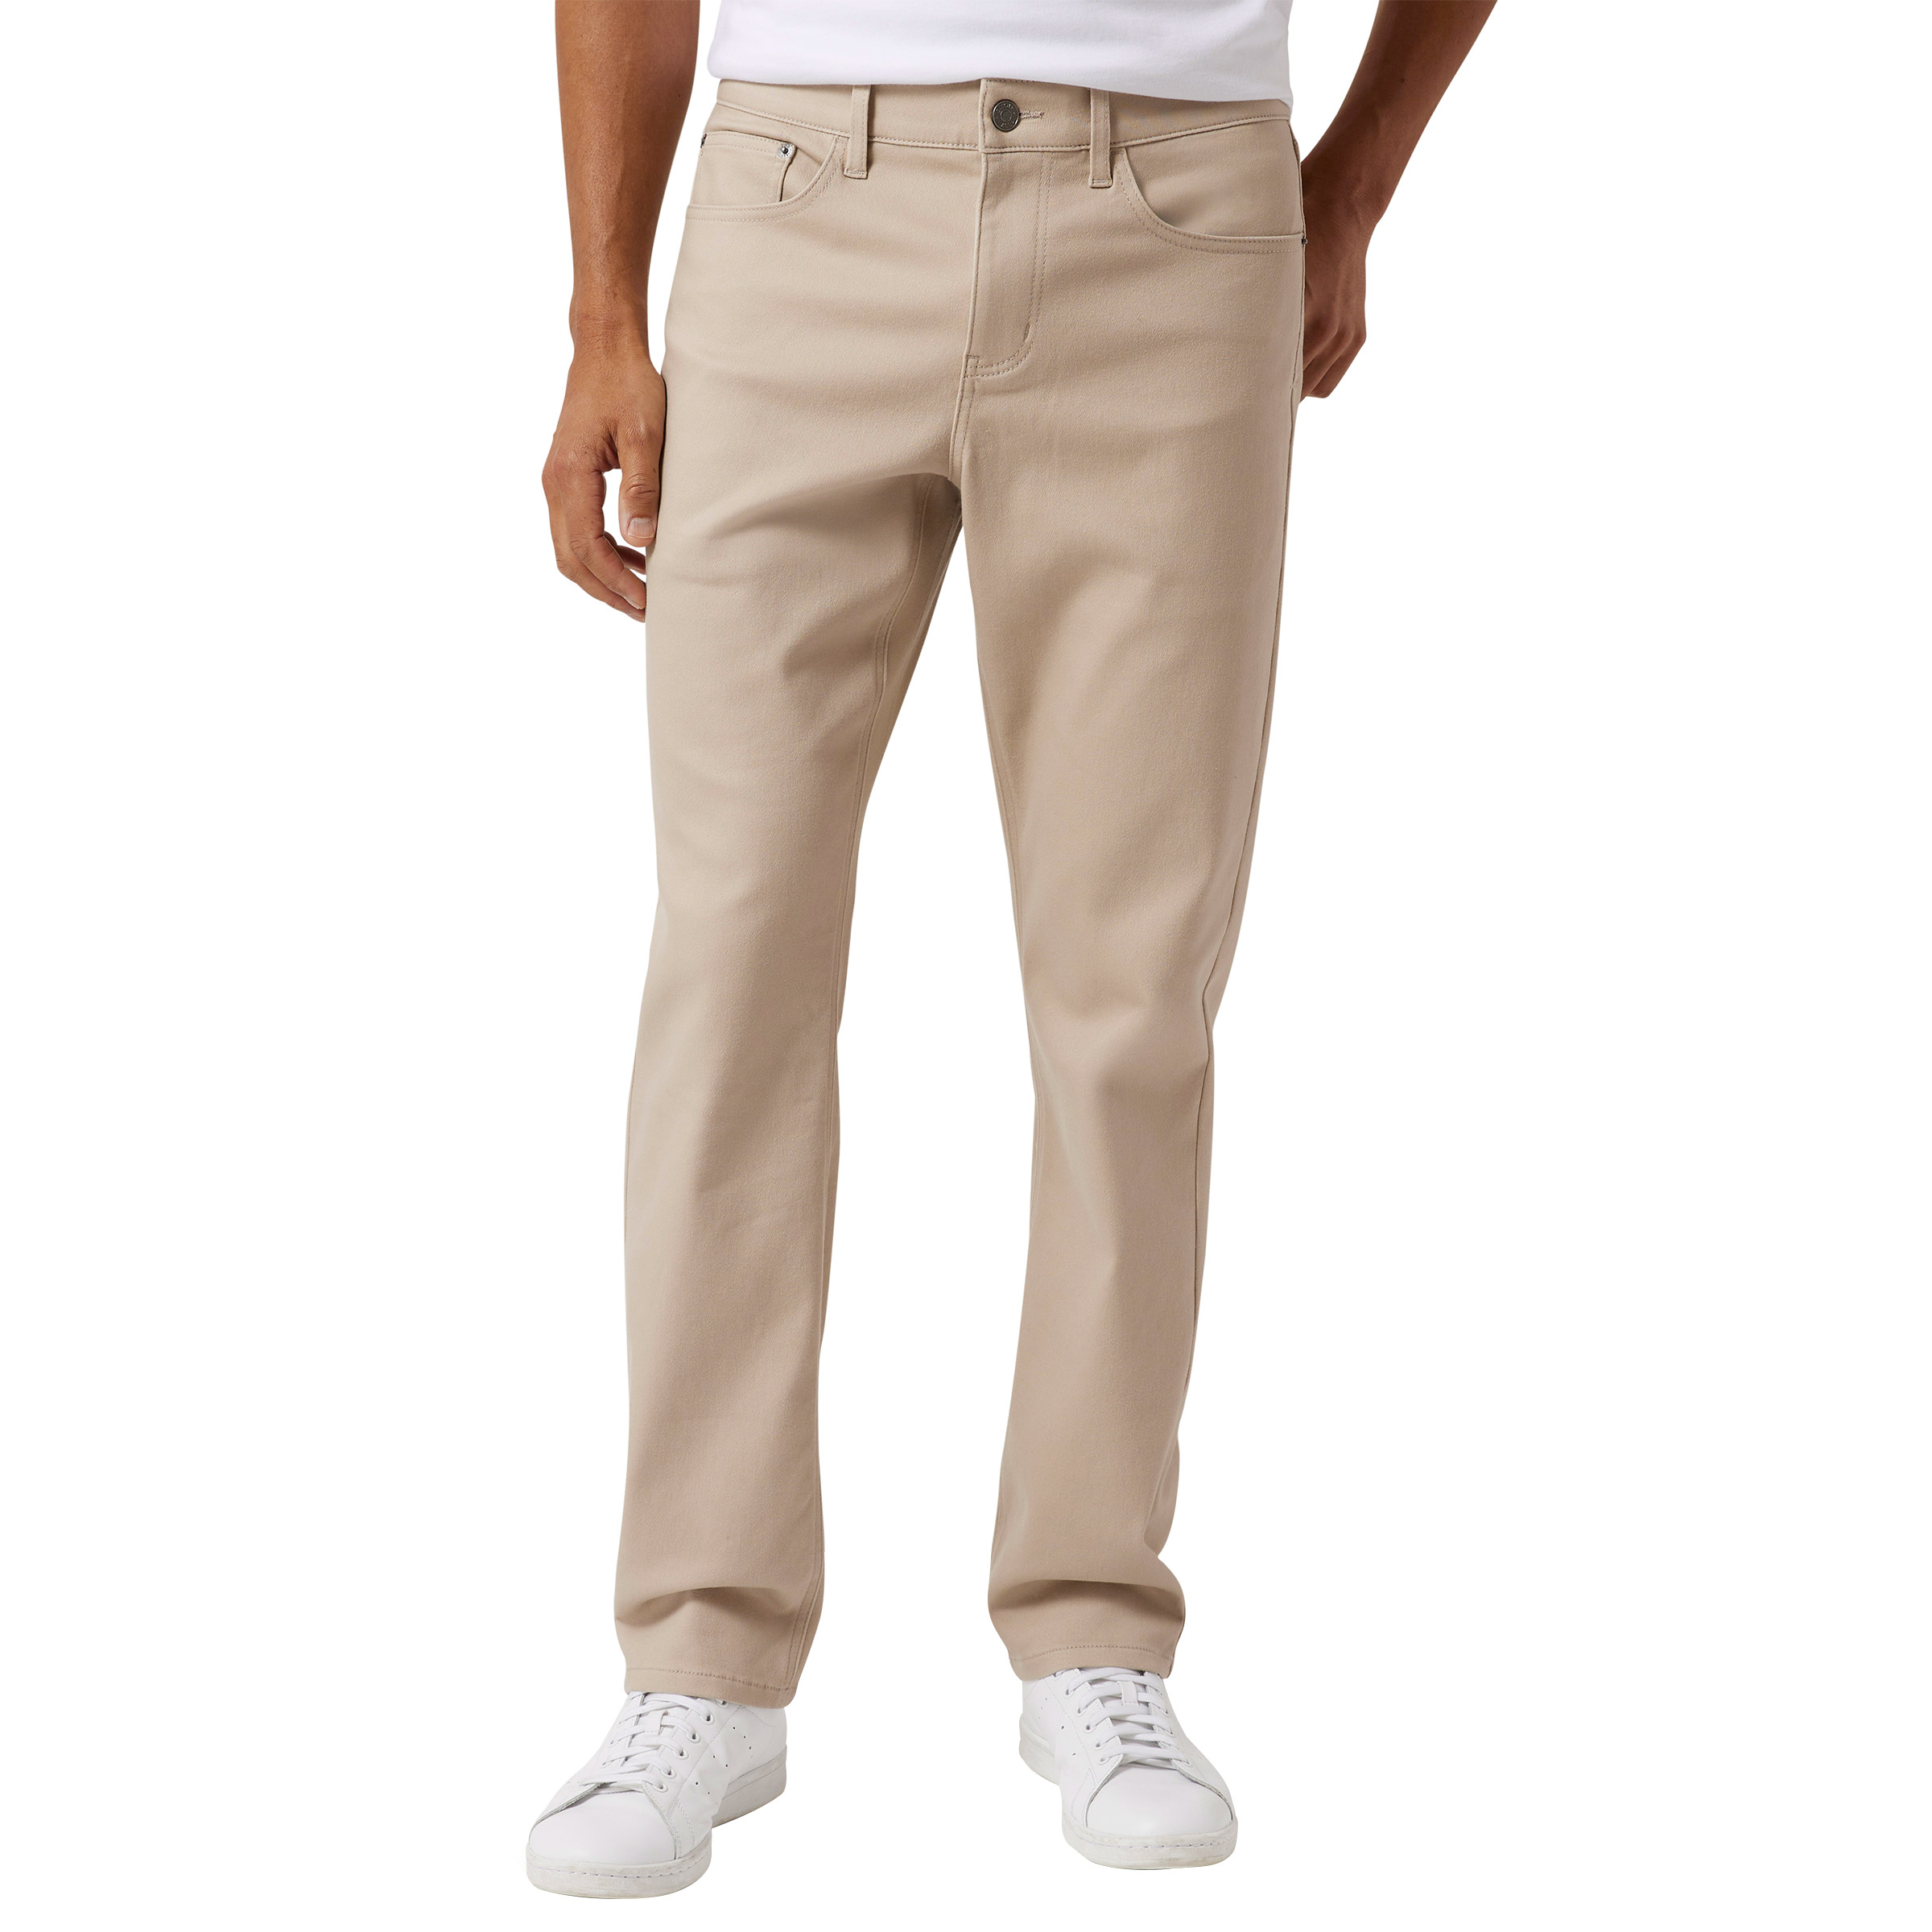 Izod Men’s Liberty Pant (Select Color & Size) FAST FREE SHIPPING